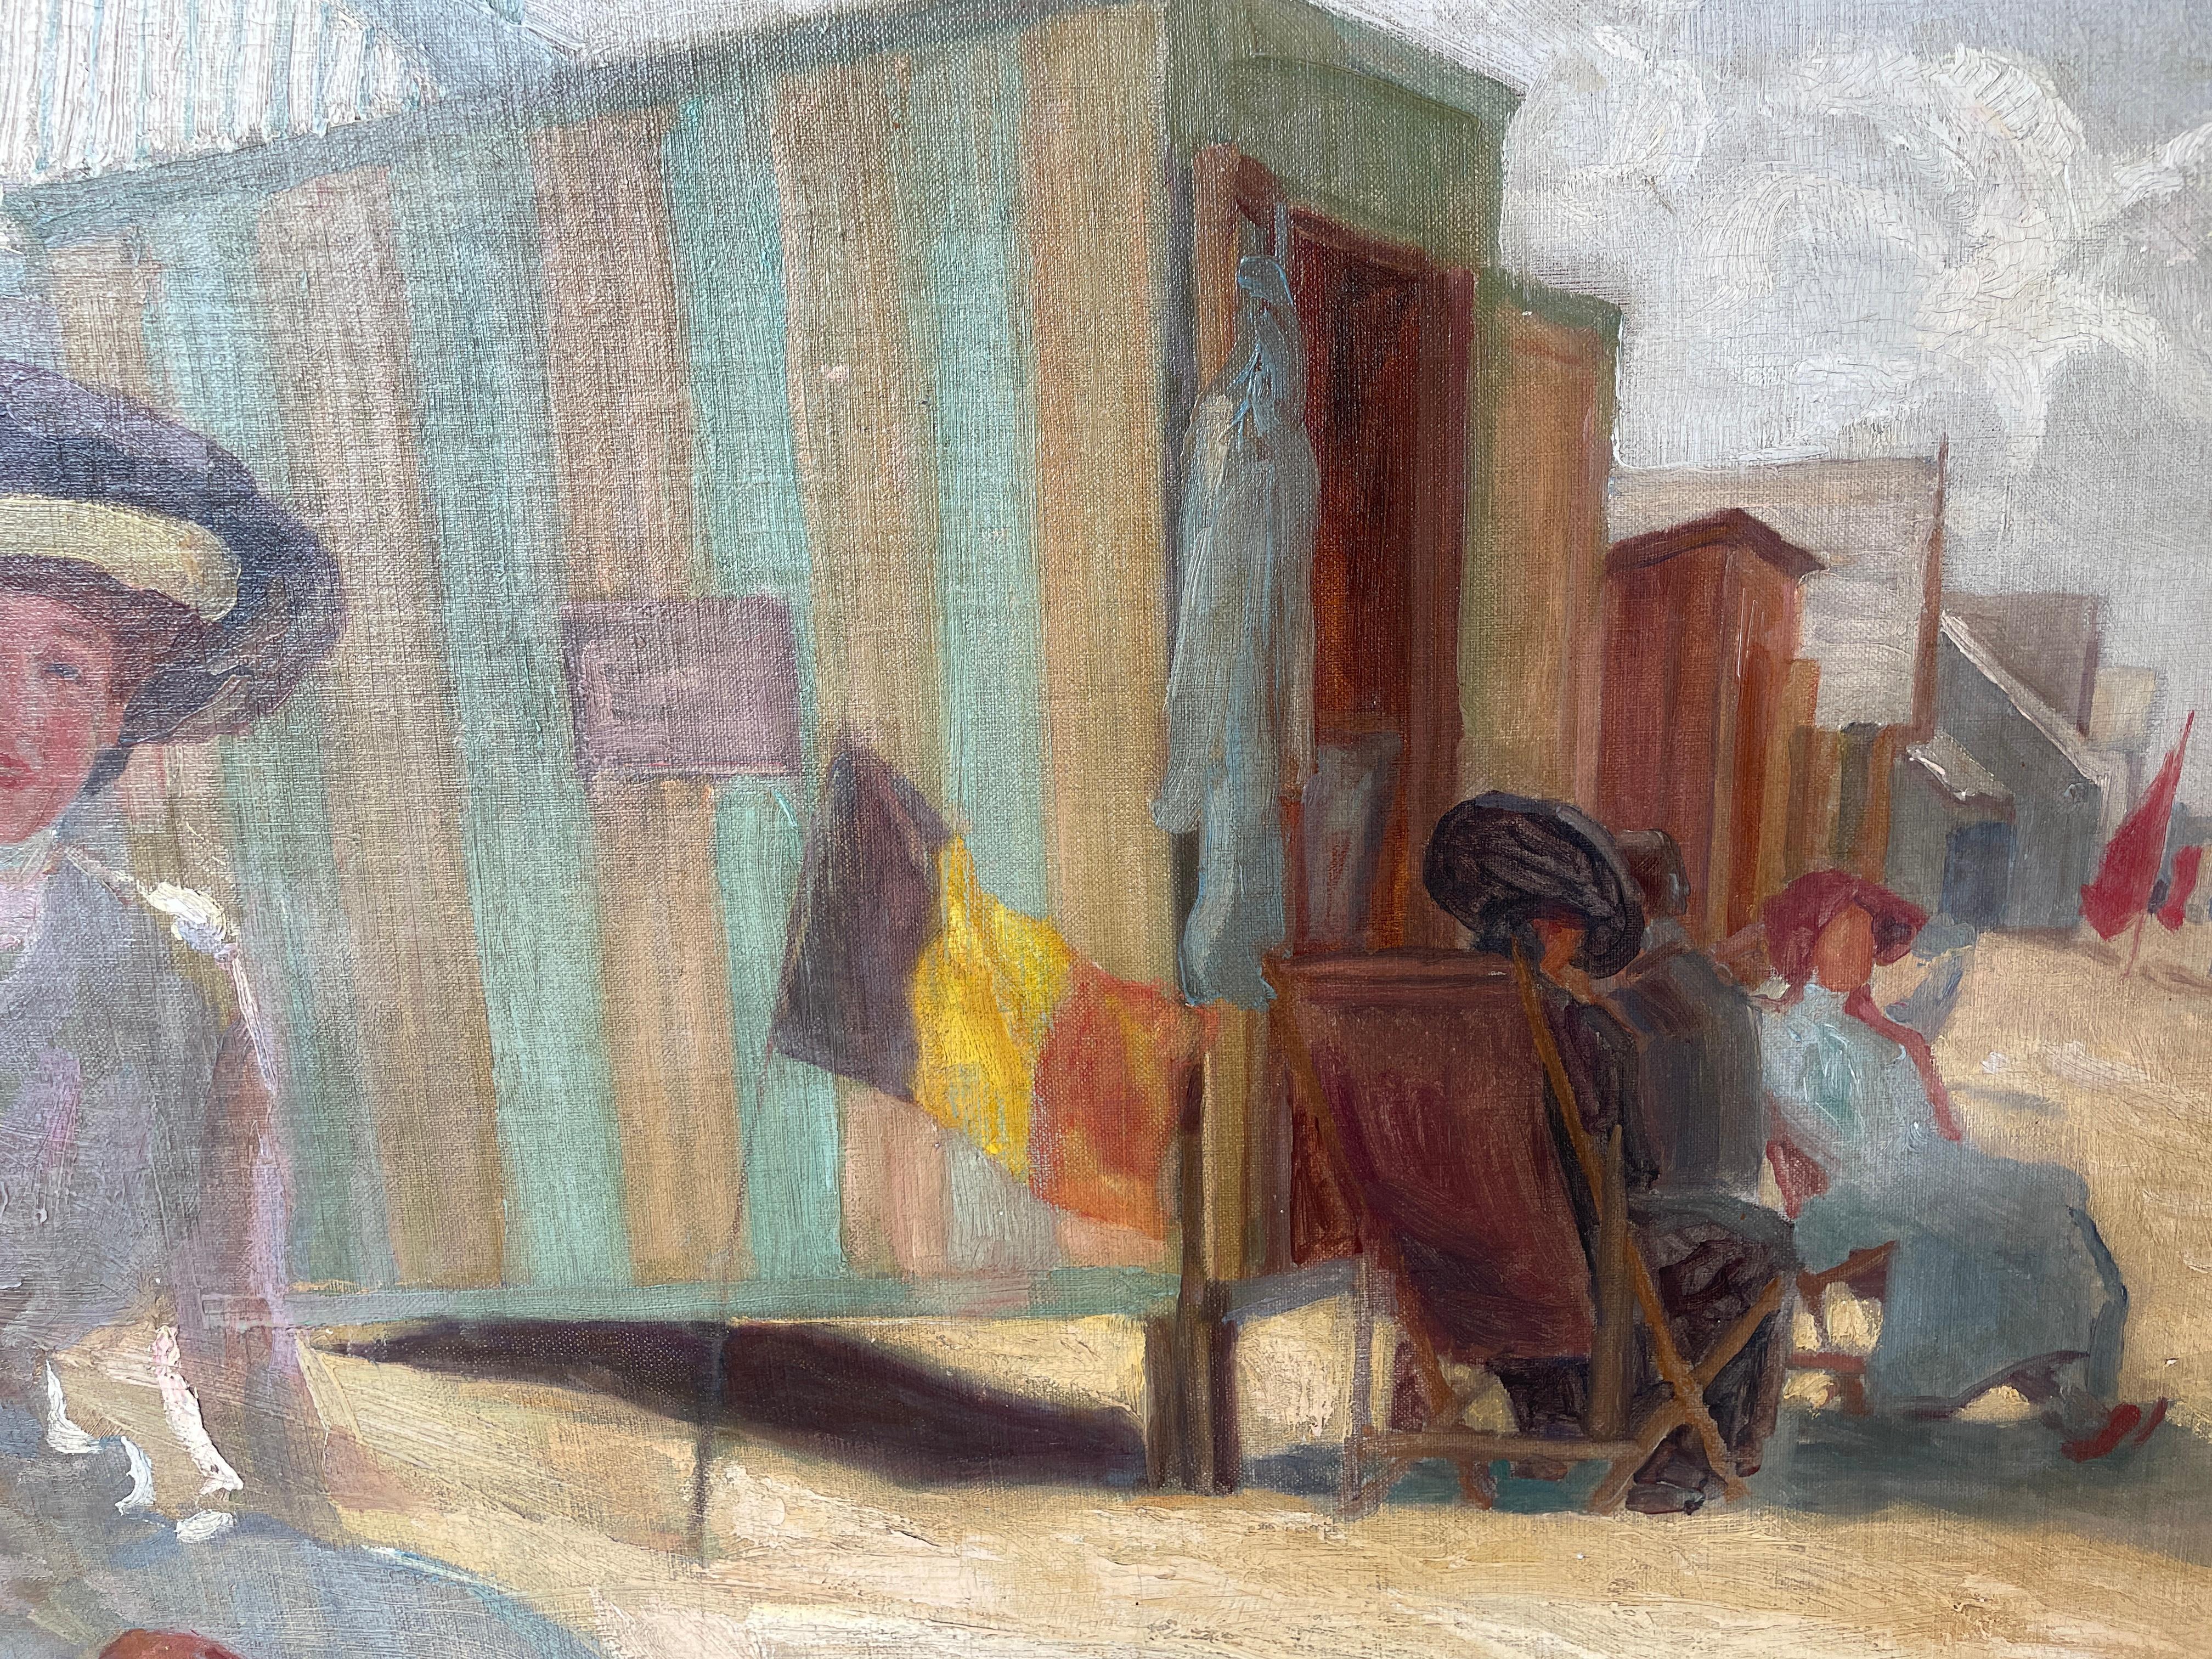 Nikol Schattenstein (1877 - 1954) 
Day at the Beach
Oil on canvas
27 3/4 x 33 1/2 inches
Signed lower left

Provenance:
Descended in the family of the artist 
Estate of Howard Aronson
Doyle New York, Fine Art, September 28, 2021, Lot 1045

Born in